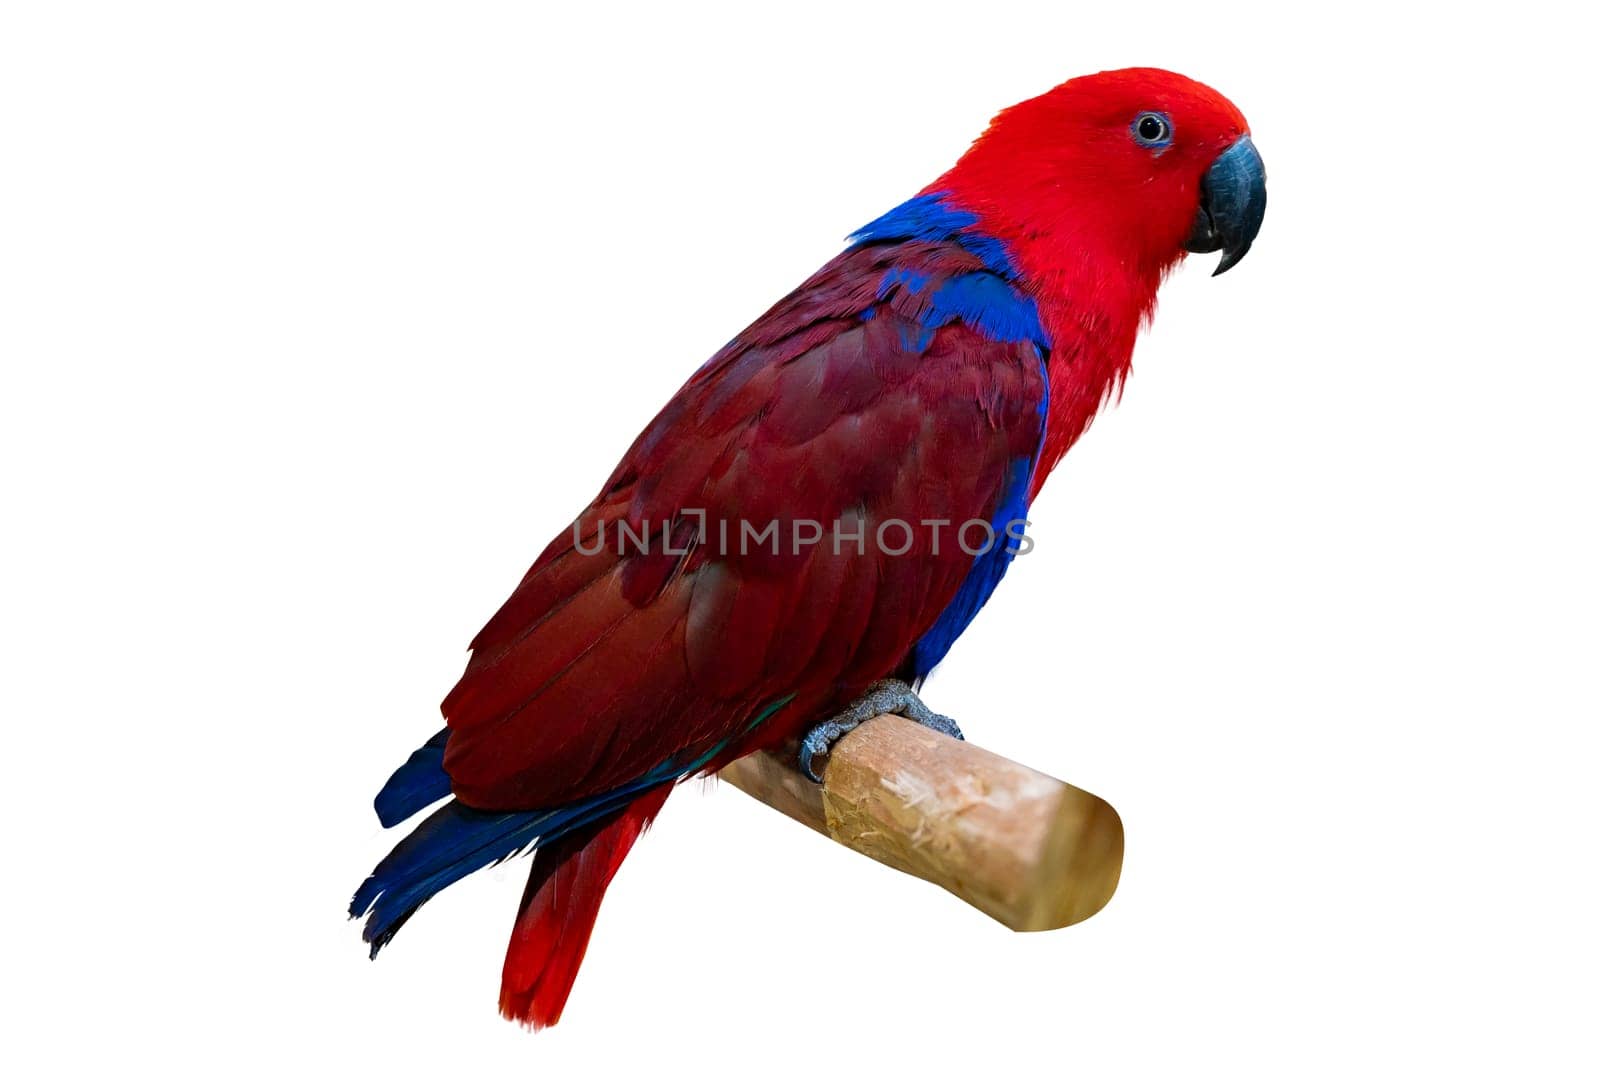 Eclectus roratus Red parakeet perching on branch on white background isolate by sarayut_thaneerat